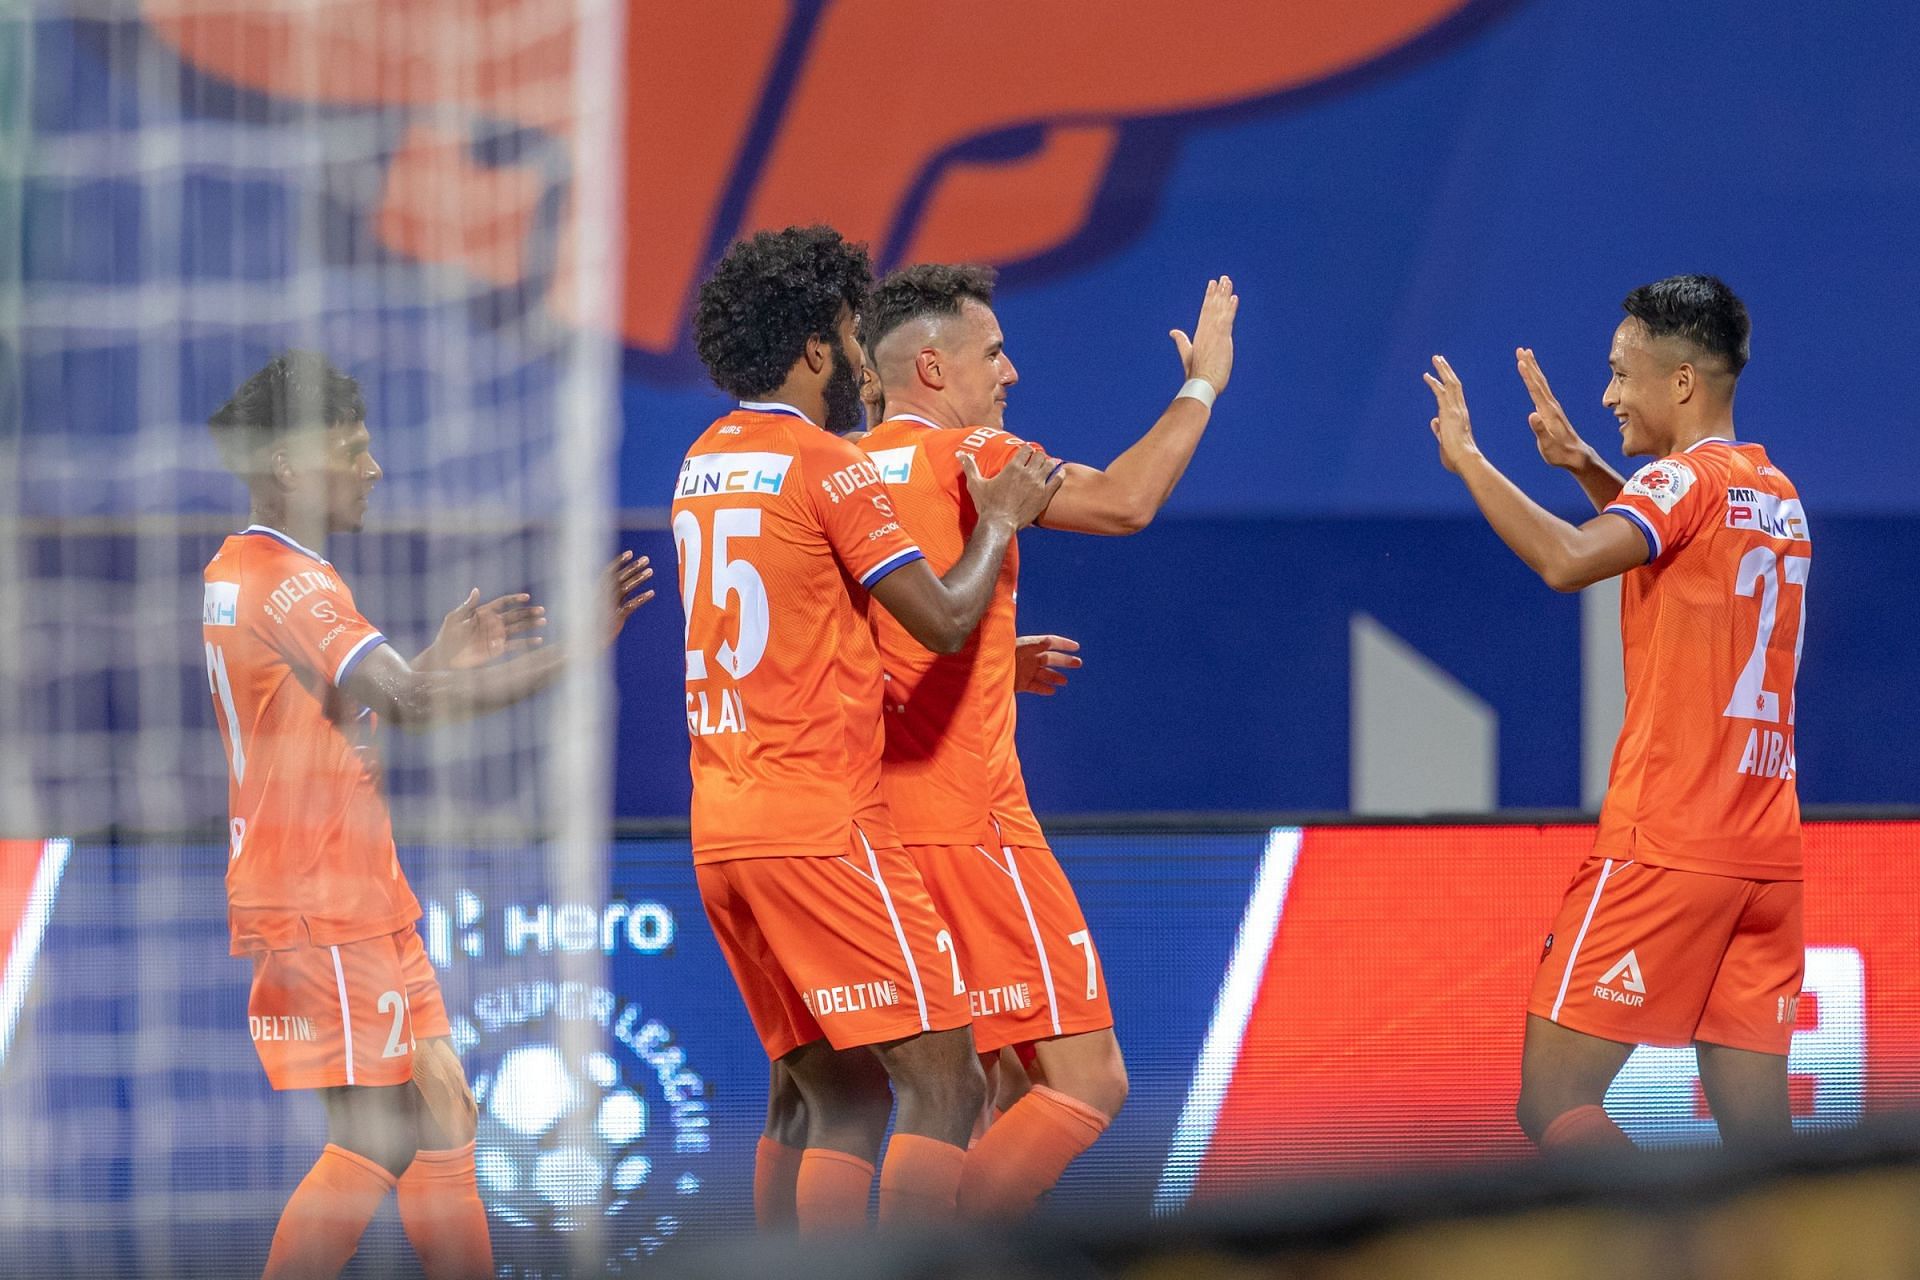 Airam Cabrera netted the equalizer for the Gaurs (Image Courtesy: ISL)